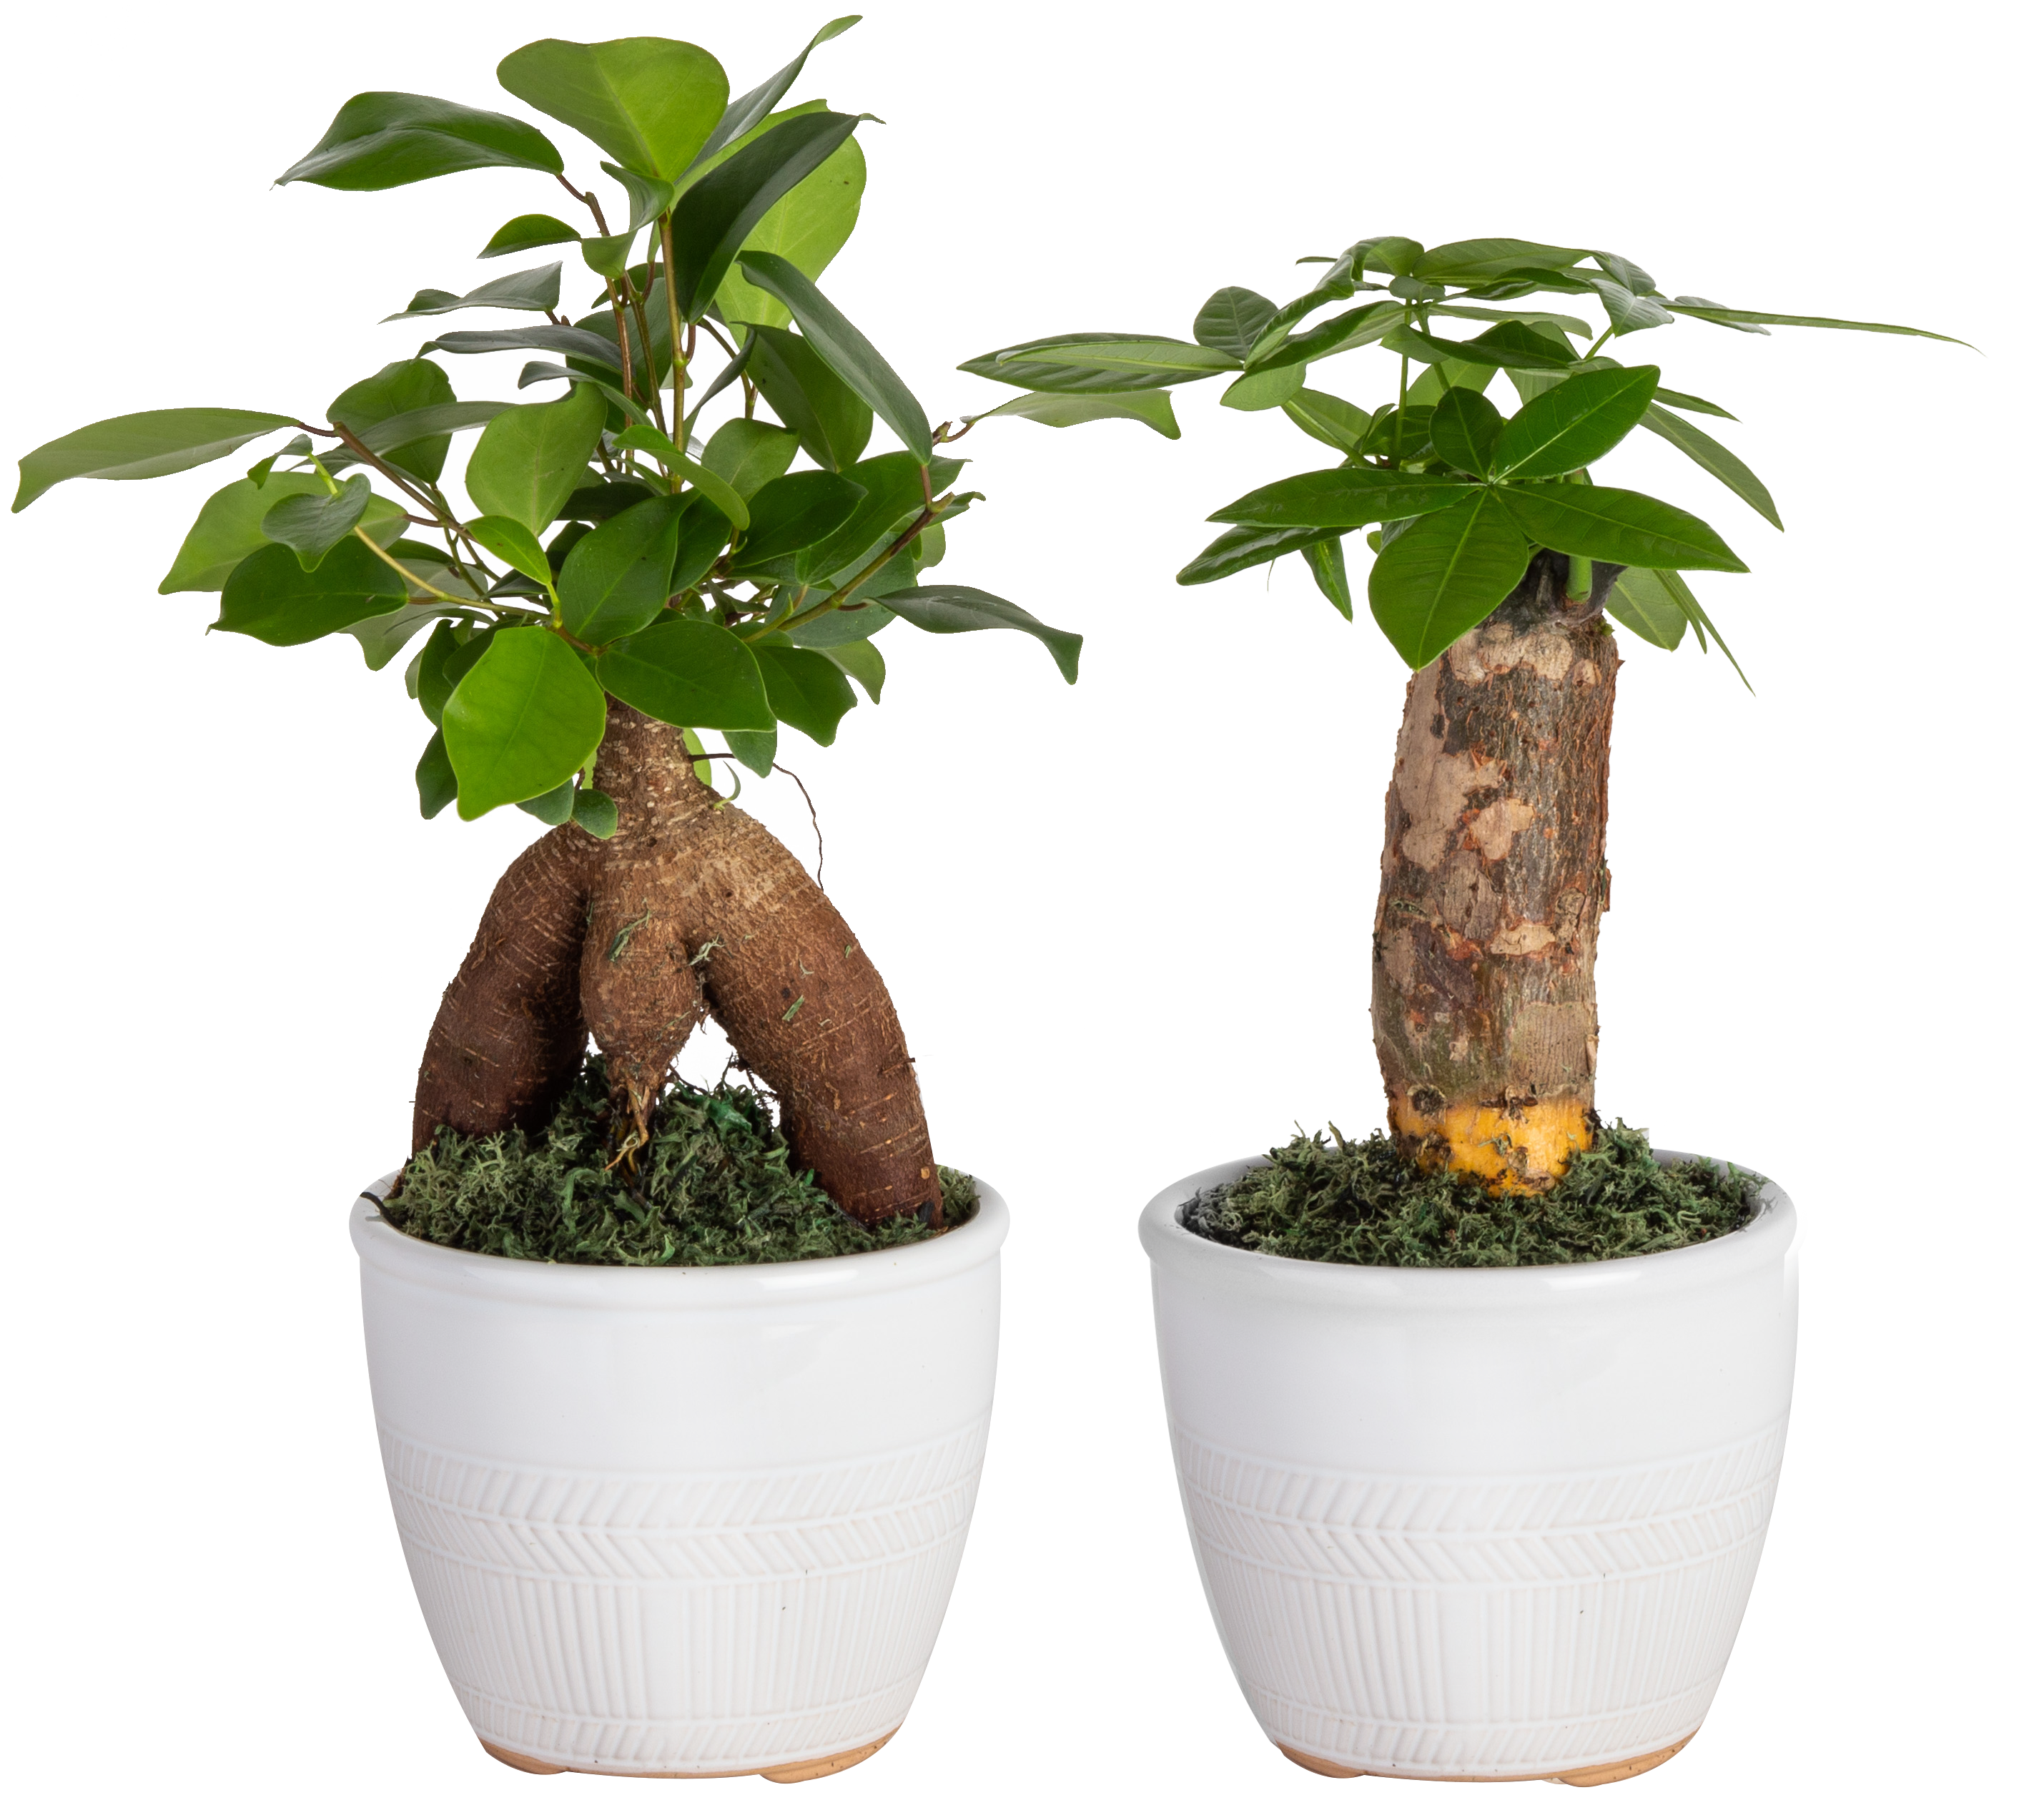 Costa Farms department House 5-in Plants 2-Pack Ficus Pachira Bonsai the in Stump Ginseng Plant and Planter House in at